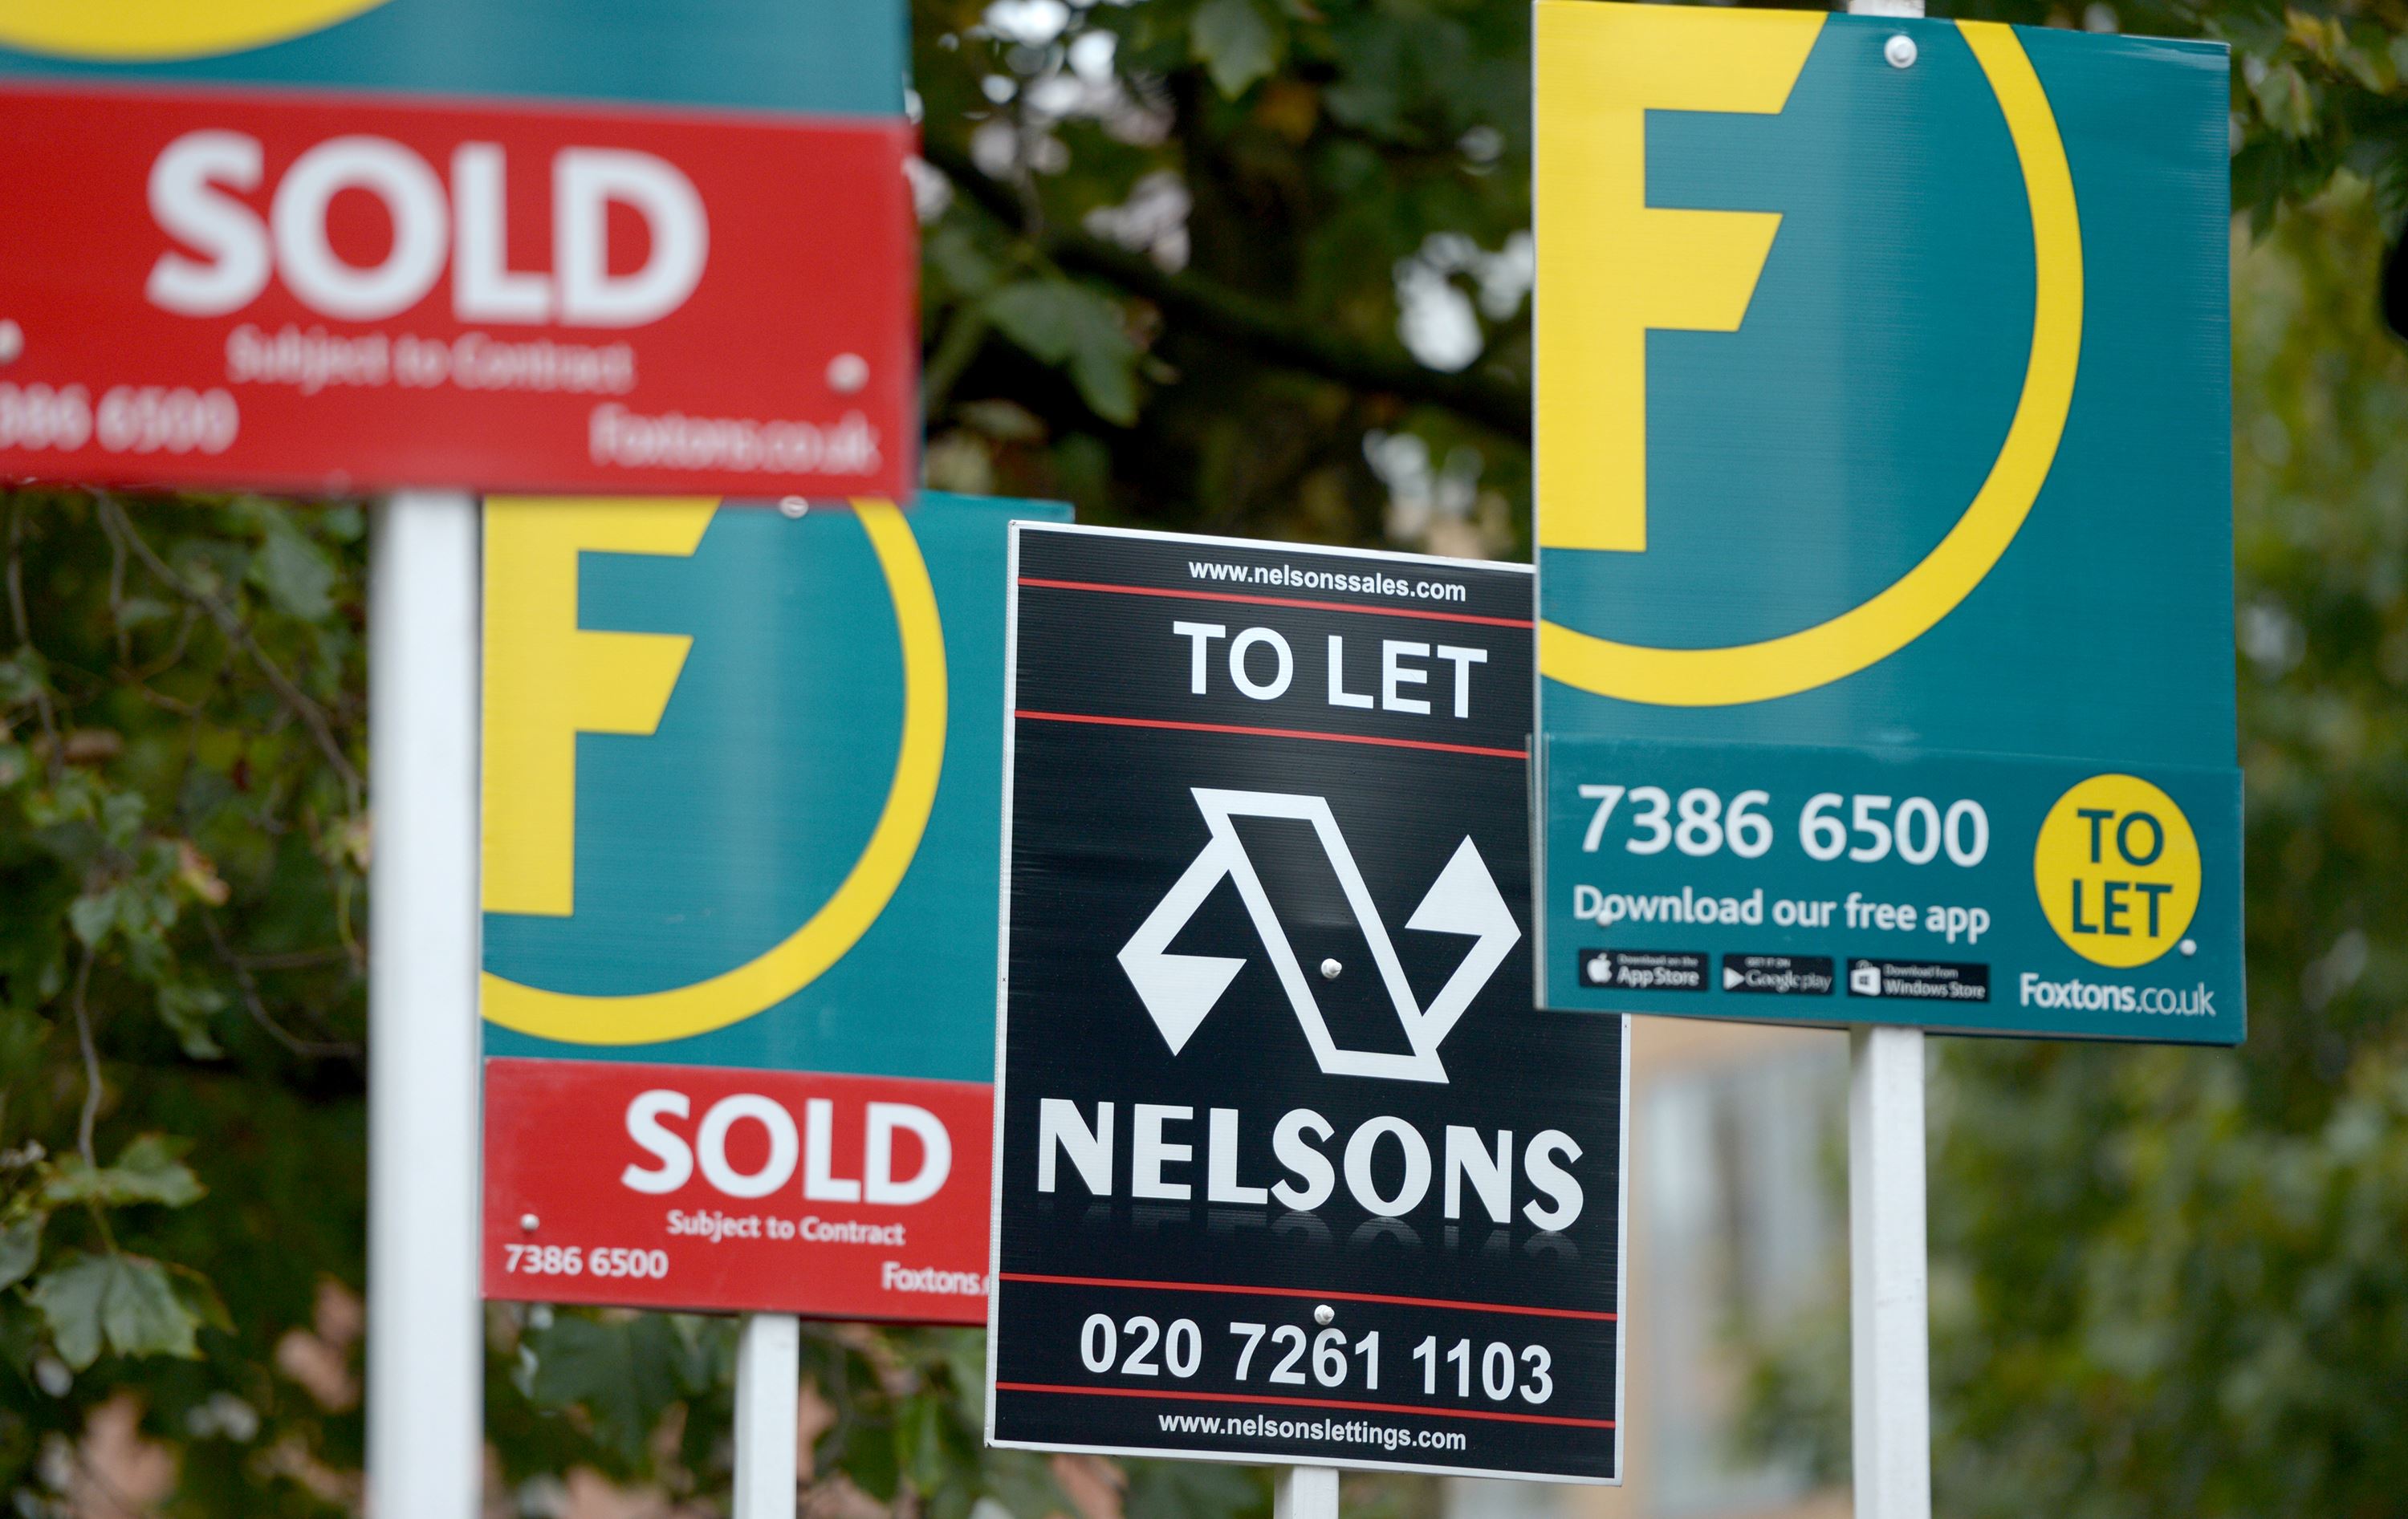 Average UK house price jumps by £25,000 in a year